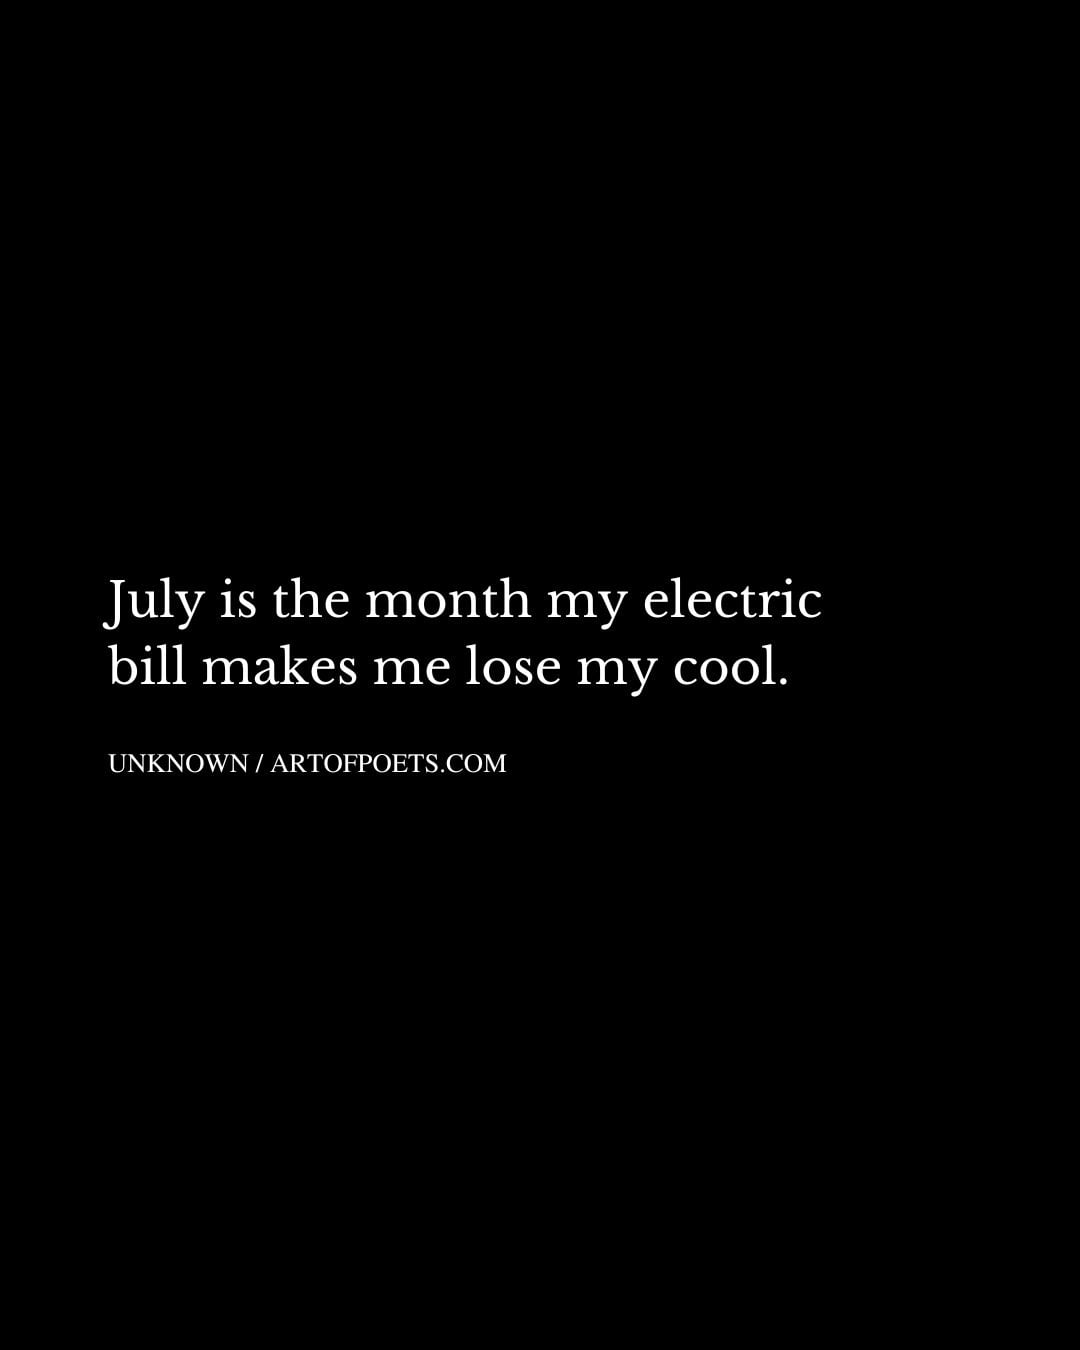 July is the month my electric bill makes me lose my cool